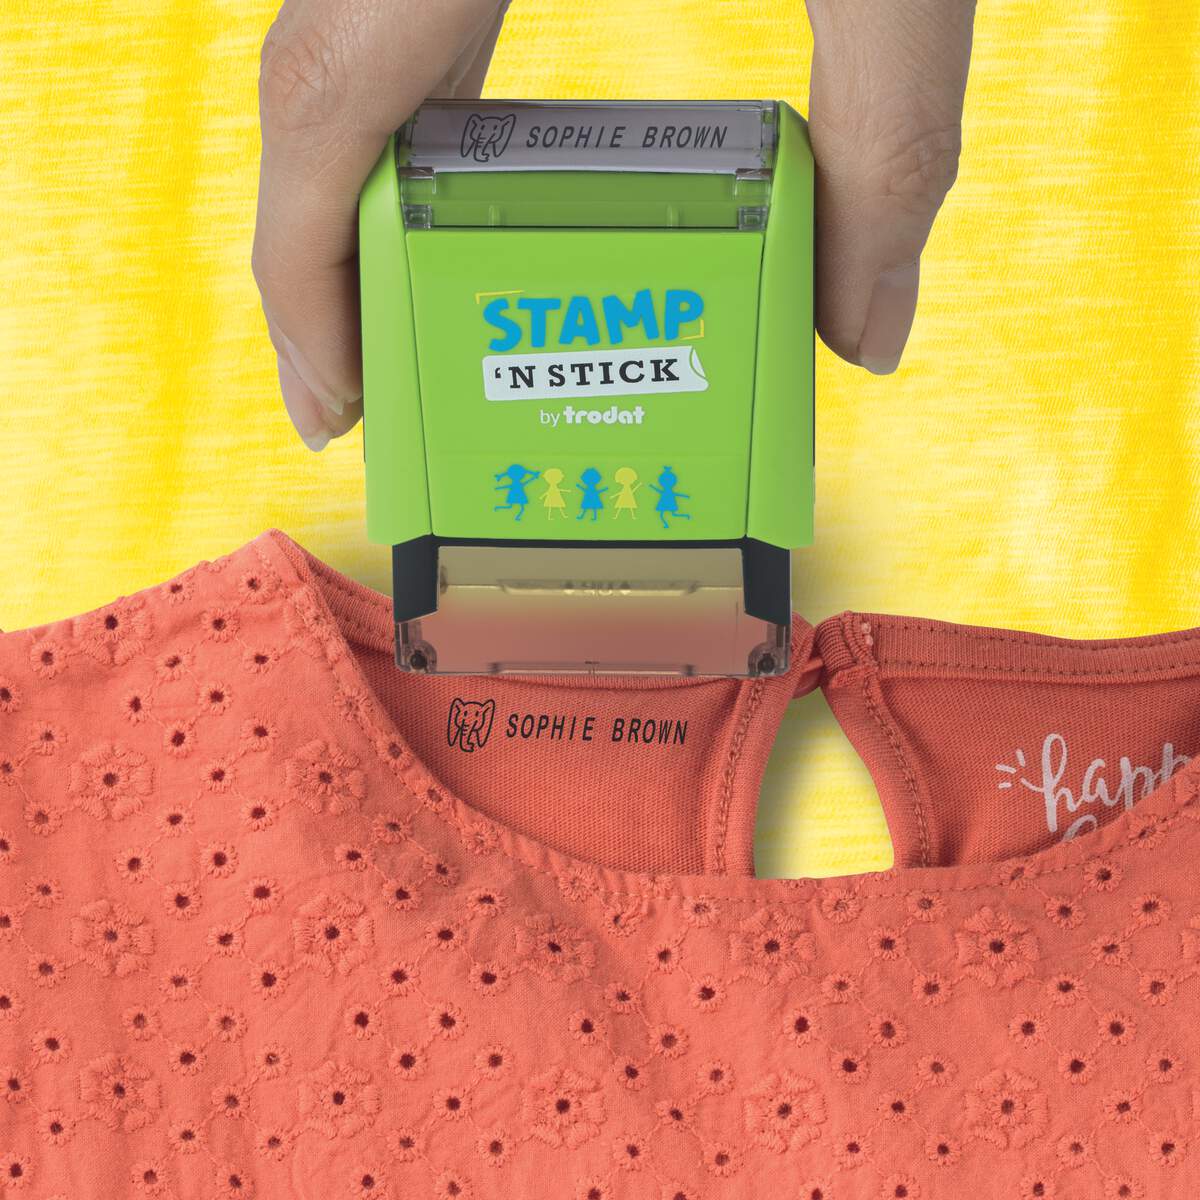 Trodat Stamp 'N Stick English Text 199019 Clothes and Personal Belongings DIY Stamper